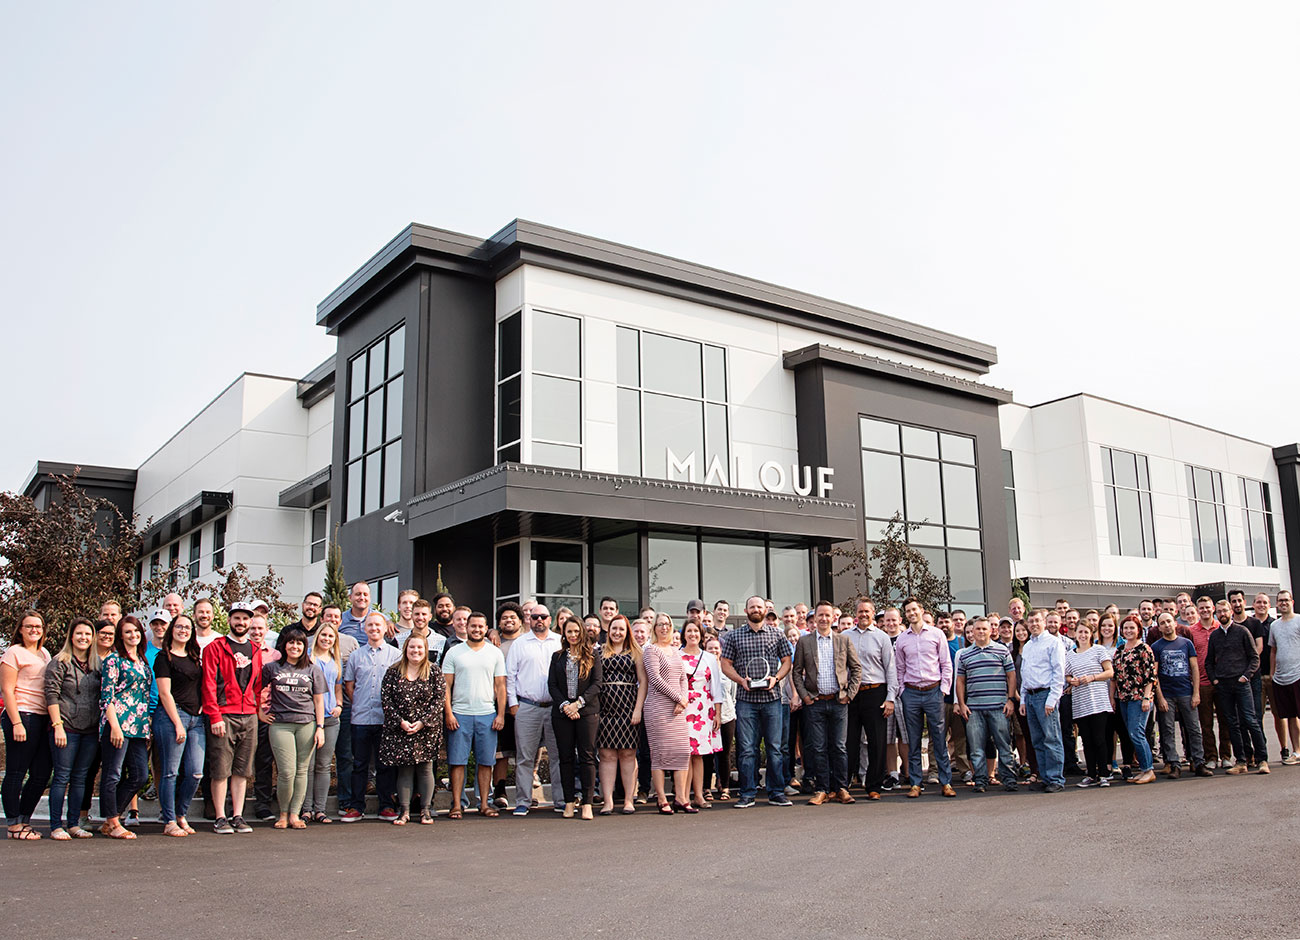 Malouf founders and the Logan-based employees stand outside the company's massive building in Nibley.